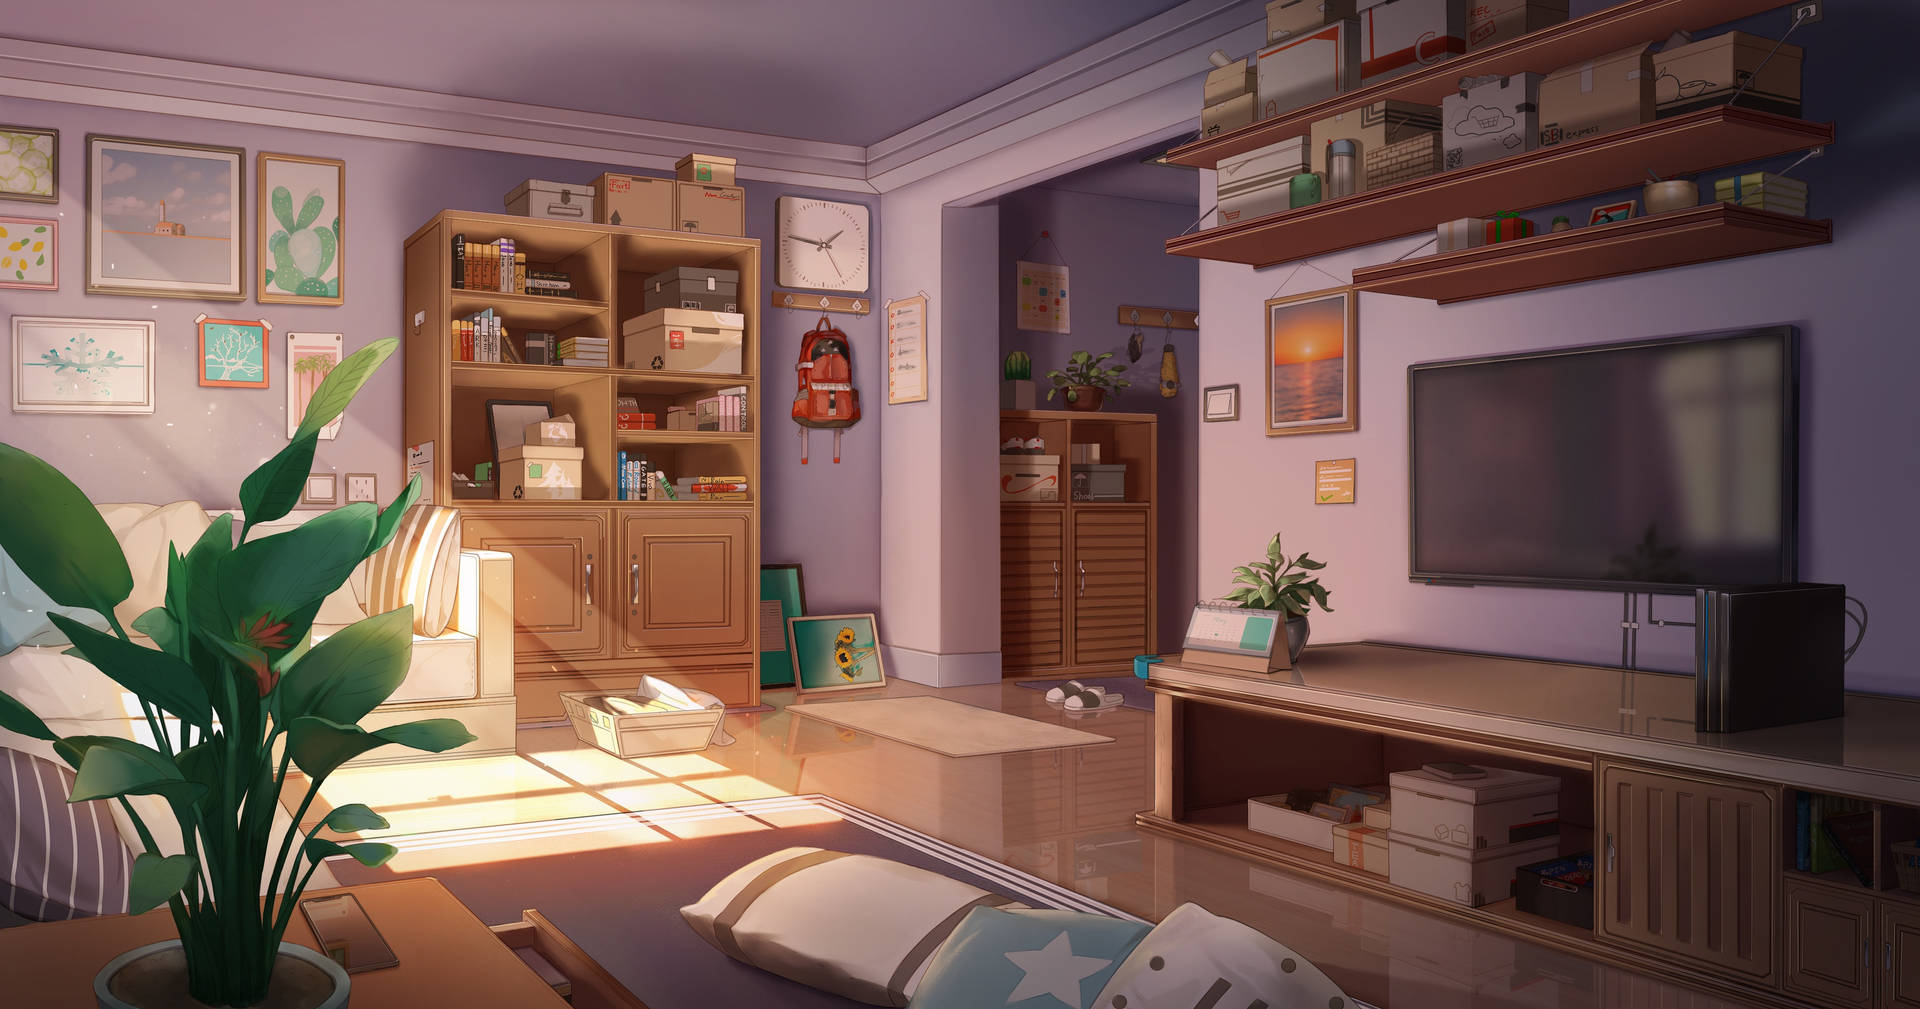 A Dreamy Anime-Inspired Bedroom Wallpaper